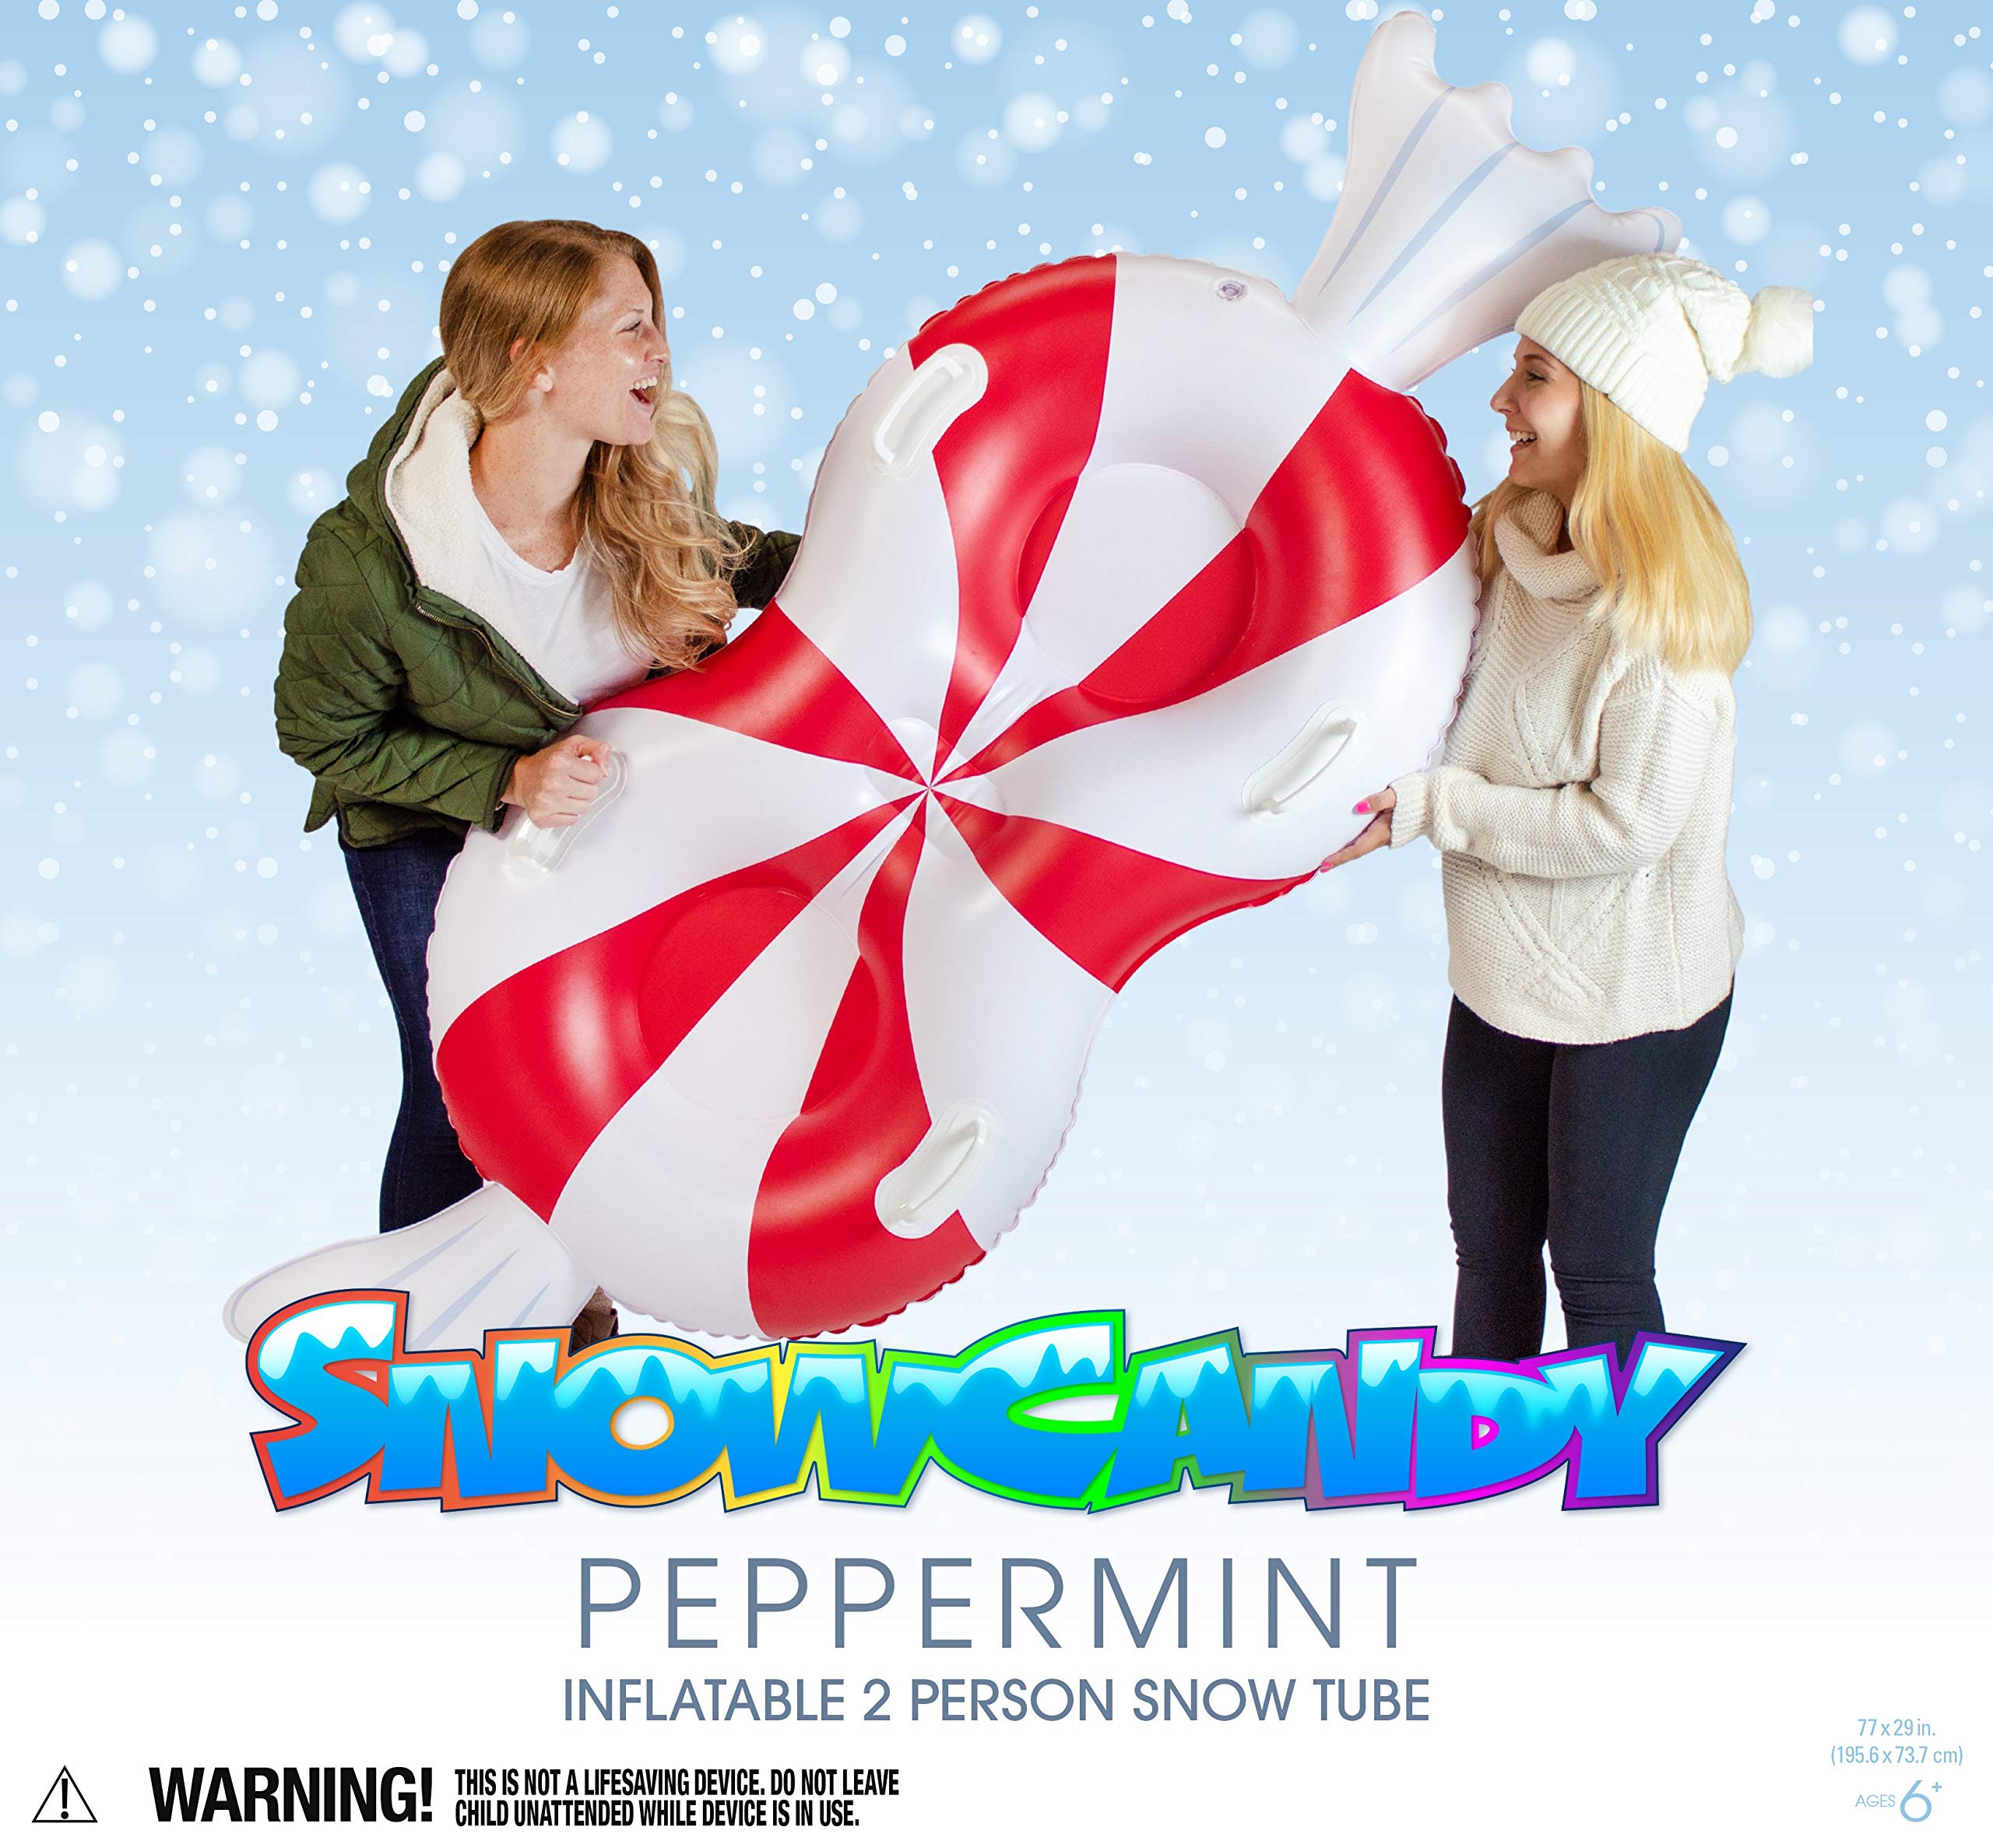 SnowCandy Inflatable Summer & Winter Outdoor Sleds, Tubes, & Floats. The Inflatable Toy Rated for The Beach or The Snow Slopes (Peppermint 2 Person Snow Sled & Pool Beach Float)